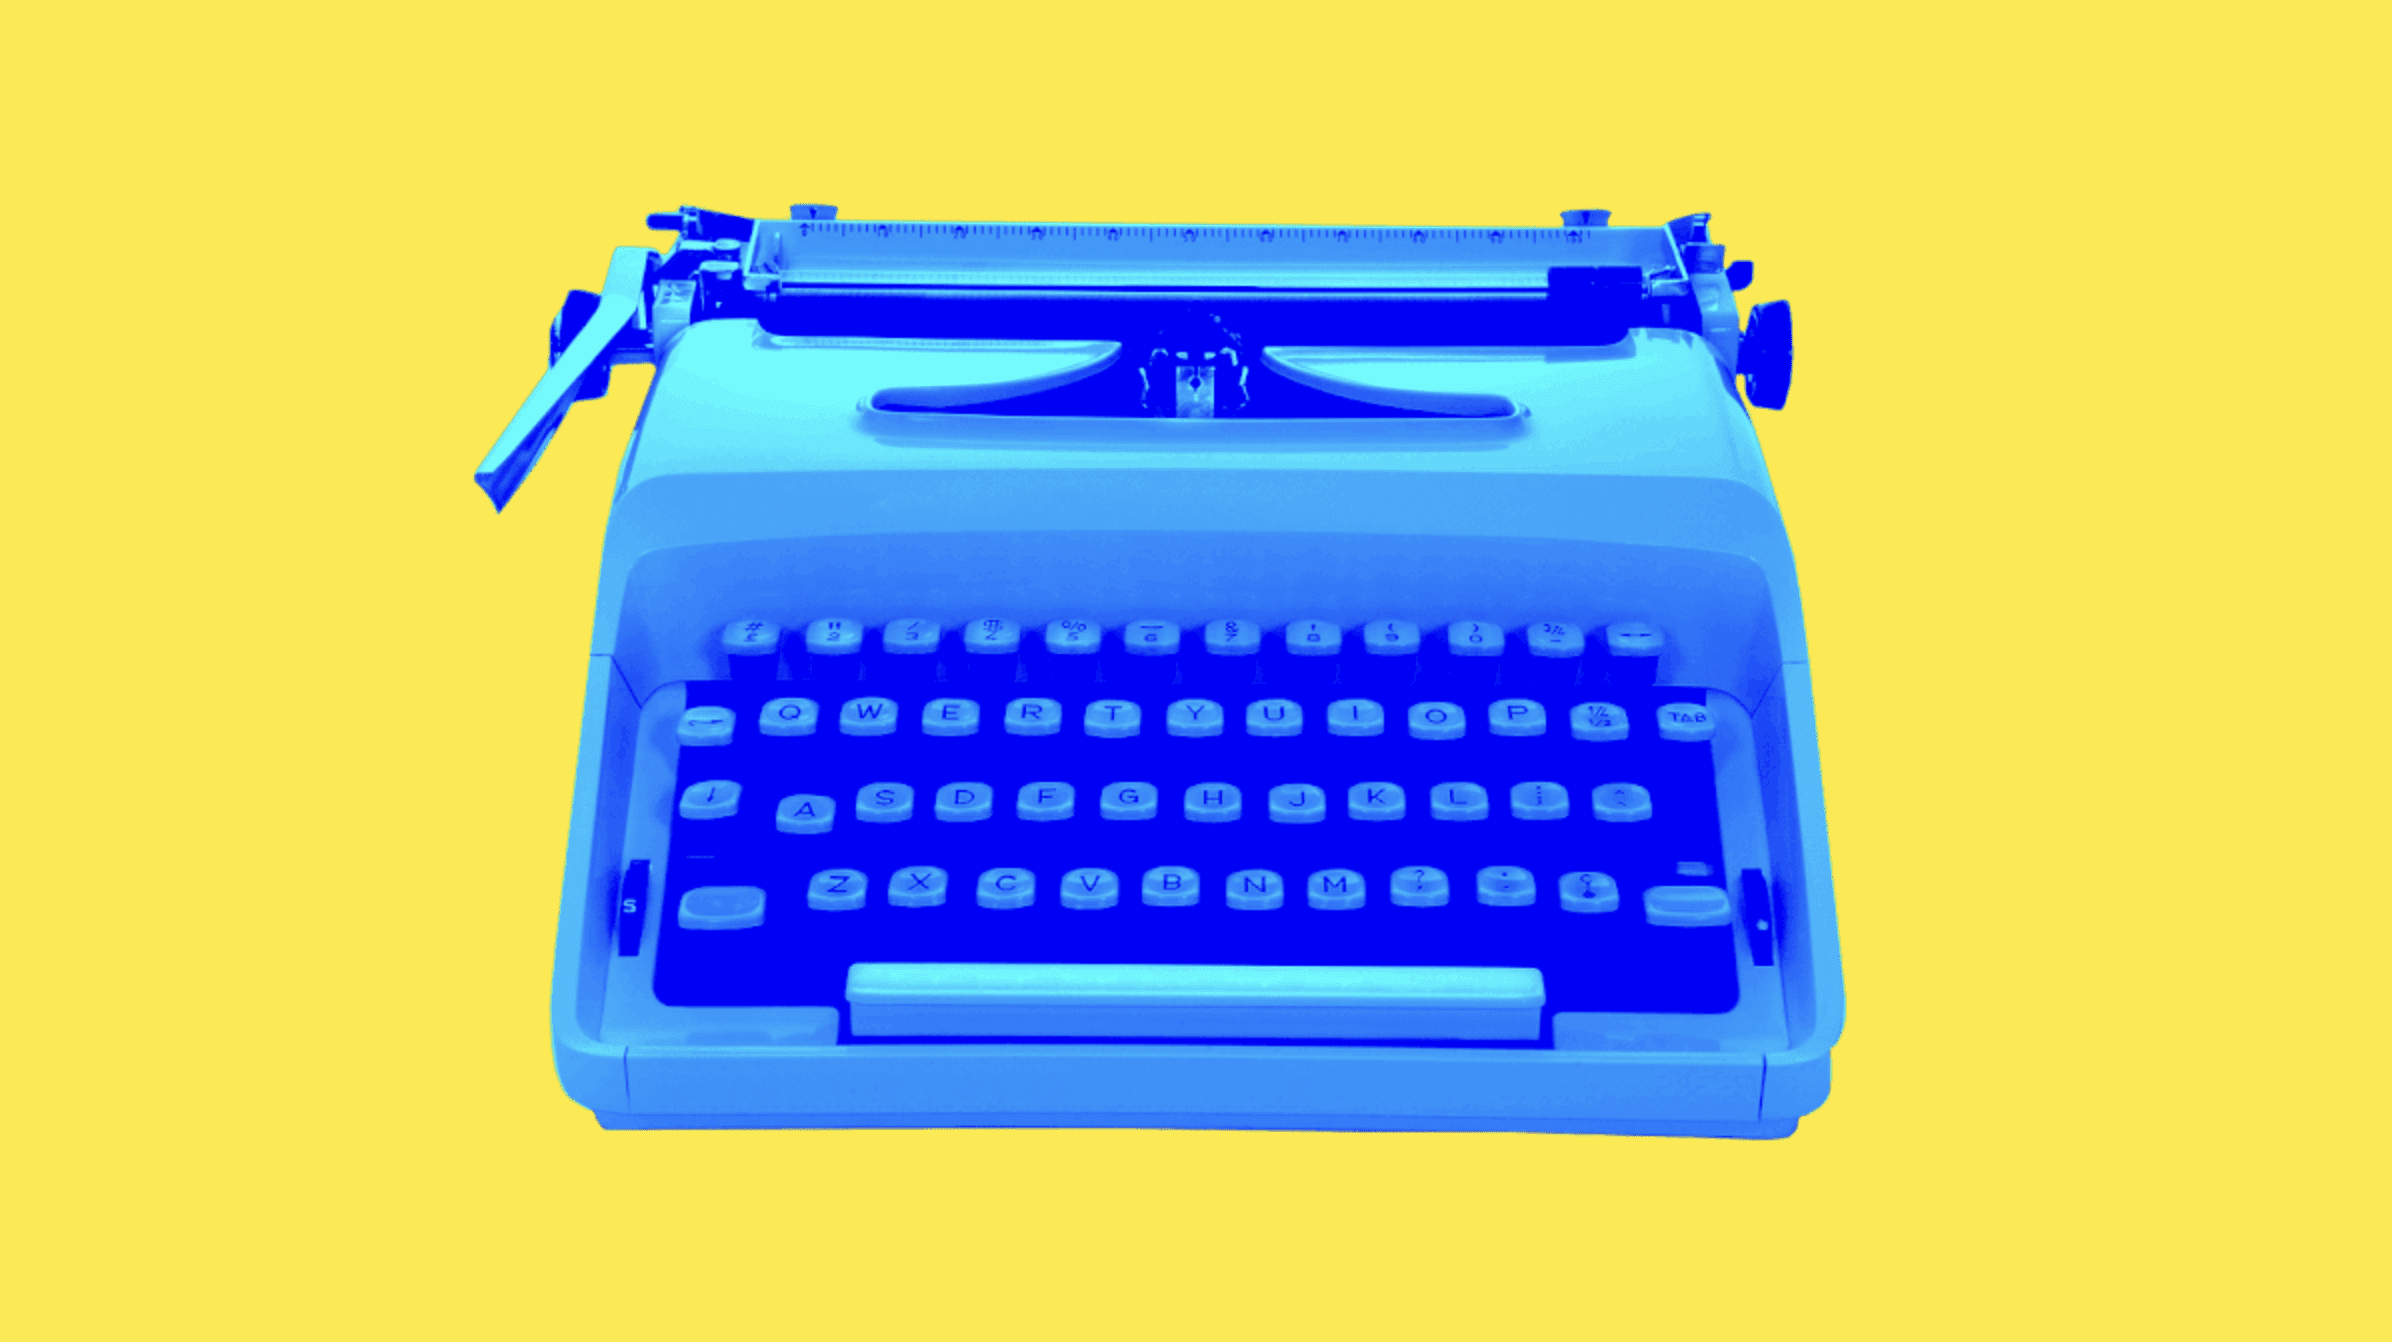 A blue typewriter on a yellow background